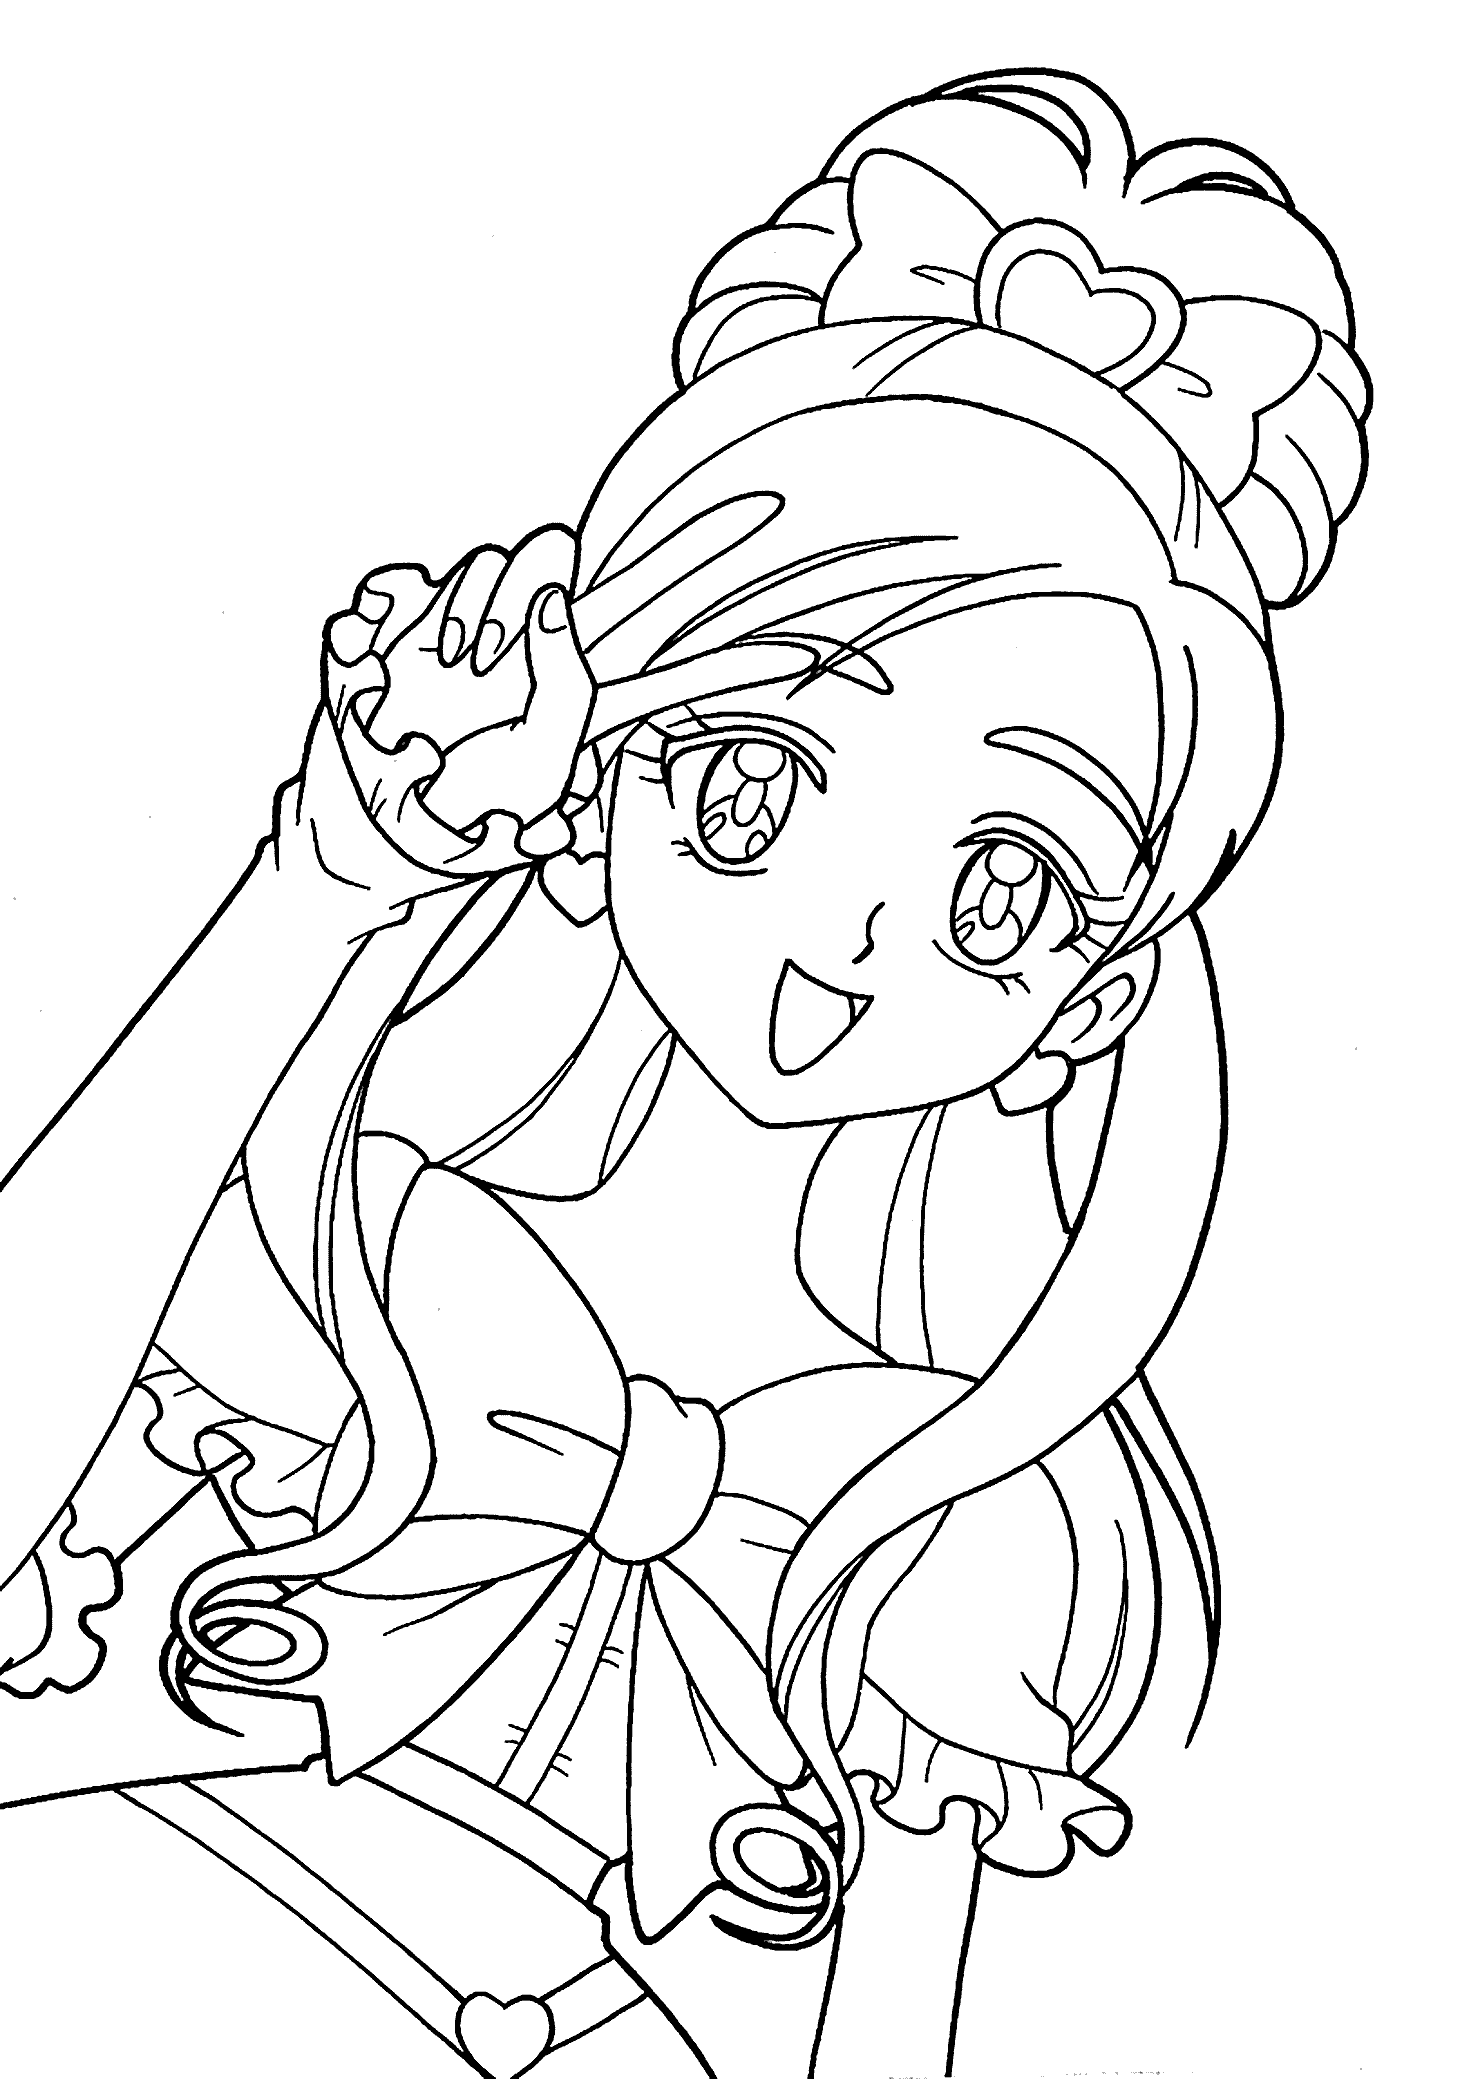 Anime Black And White Coloring Pages - Coloring Pages For All Ages -  Coloring Home